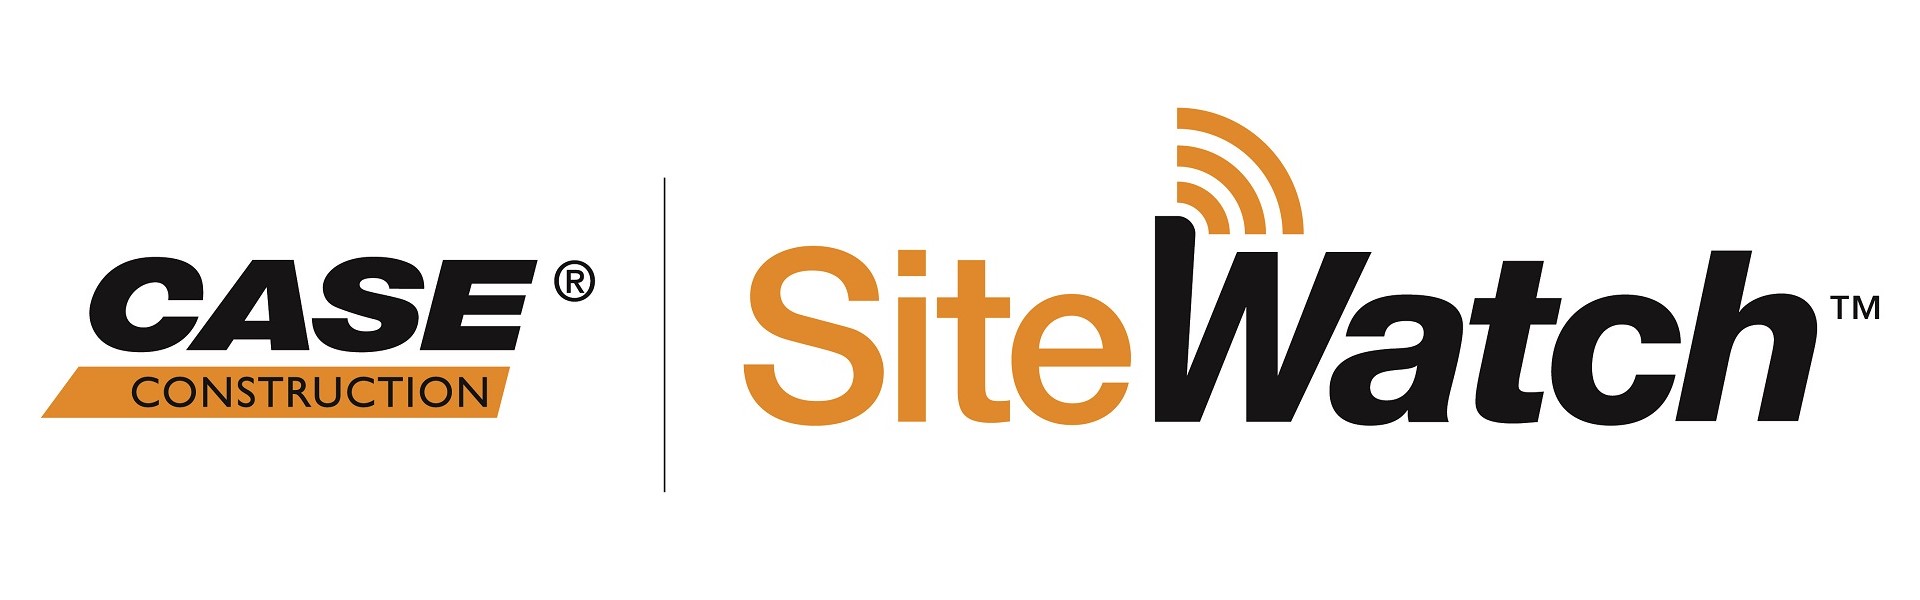 CASE upgrades SiteWatch™ telematics user interface with latest web technologies